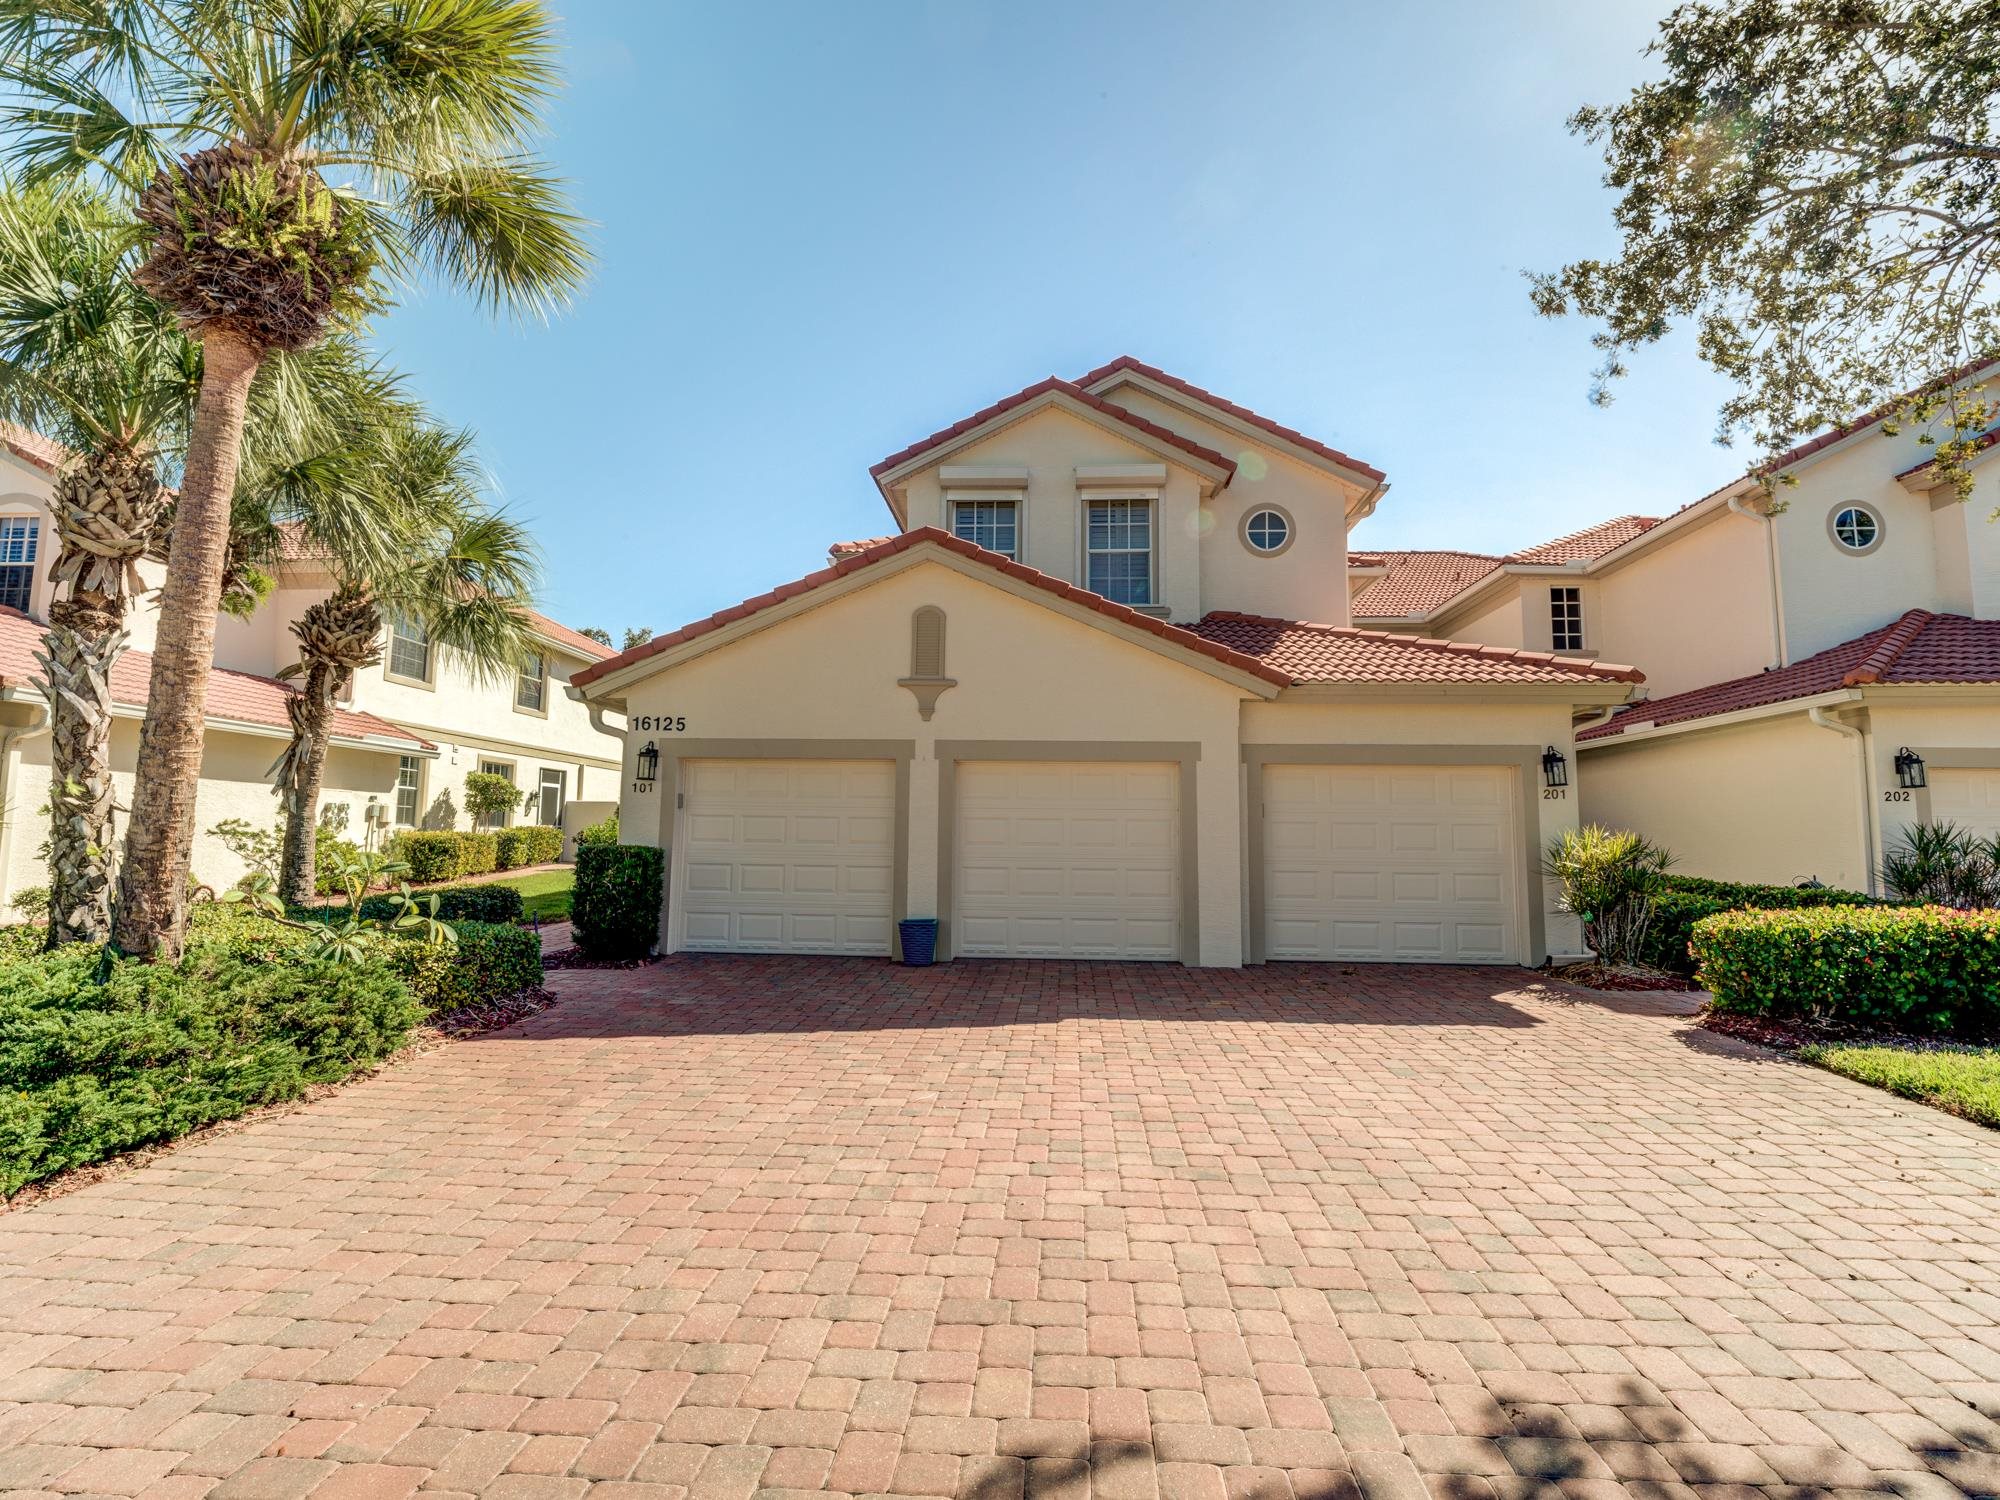 16125 Mount Abbey Way, Fort Myers, Florida 33908, 3 Bedrooms Bedrooms, ,2 BathroomsBathrooms,Condo,For Sale,Mount Abbey Way,2231017